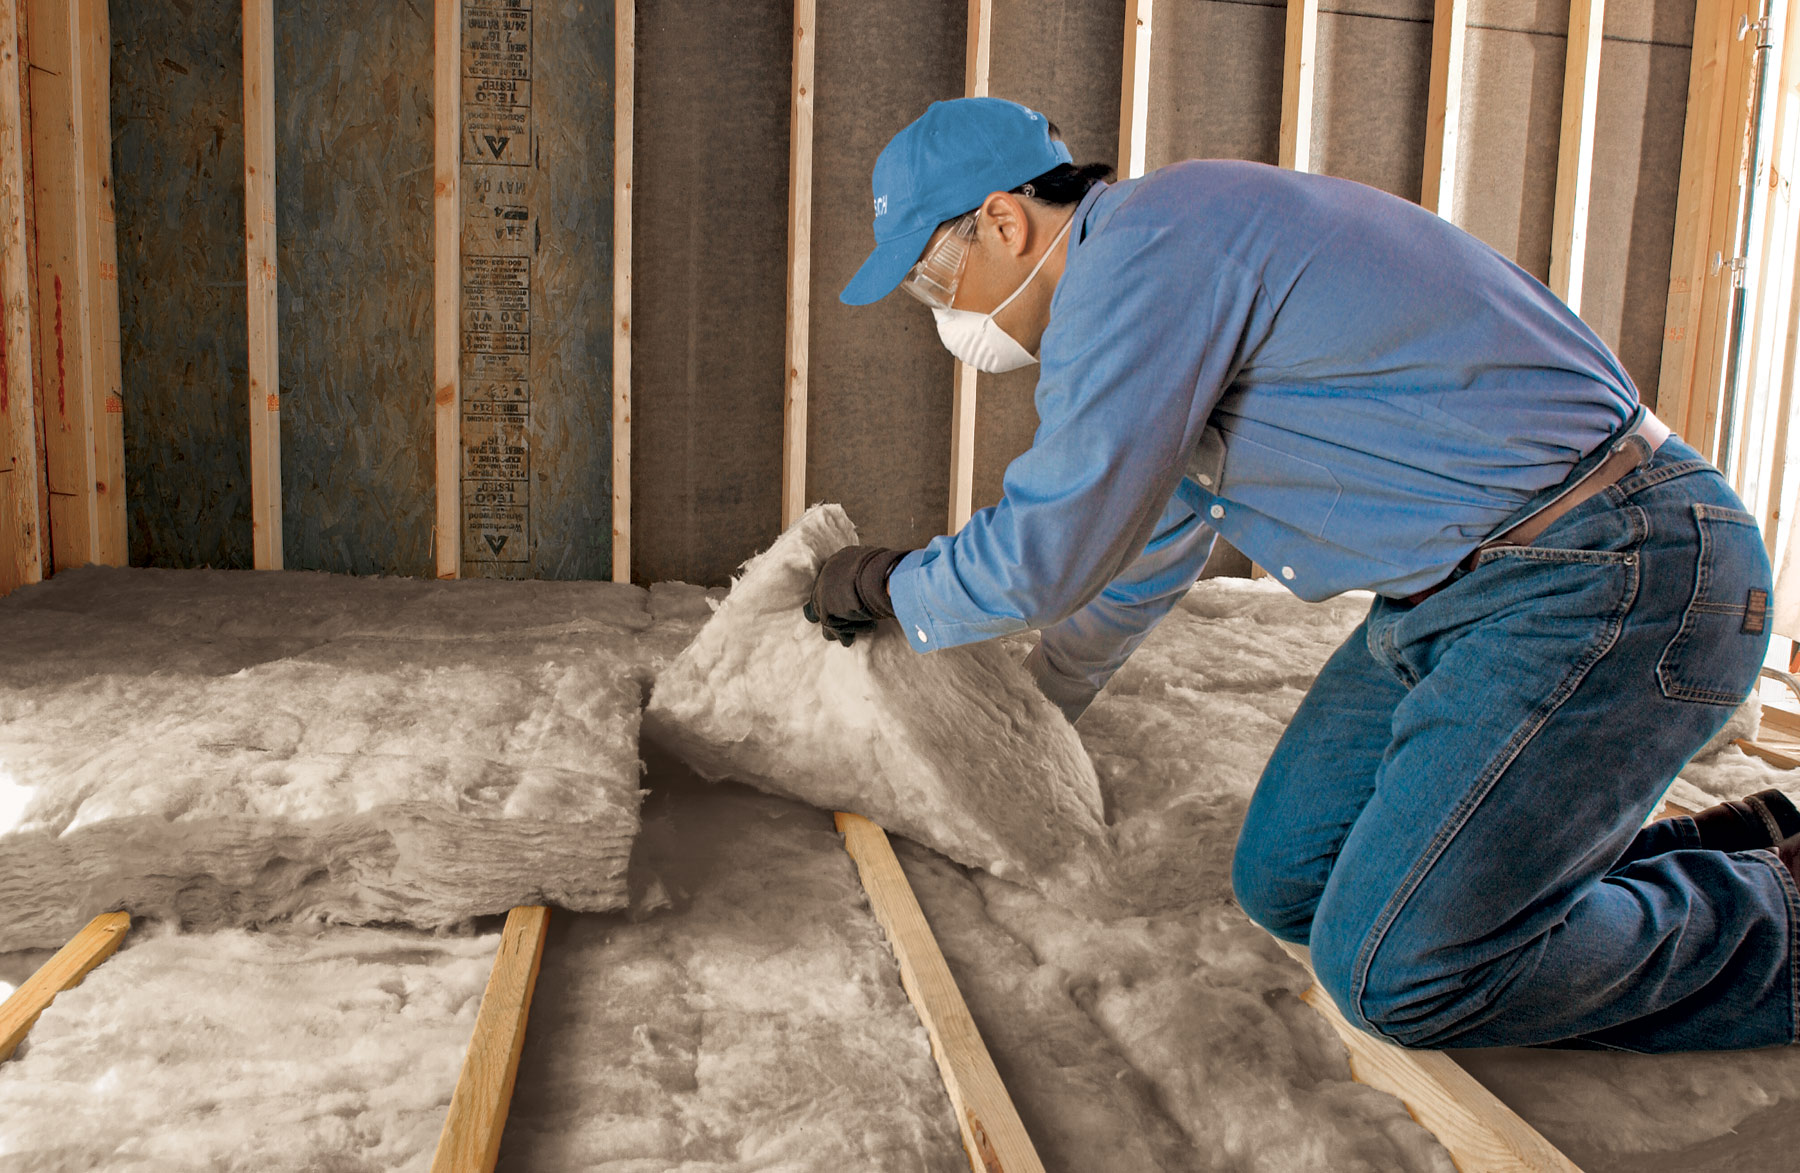 Epc4less: Loft Insulation Reduces Heat Loss and Increases Energy Performance Certificate Rating by up to 15 Points